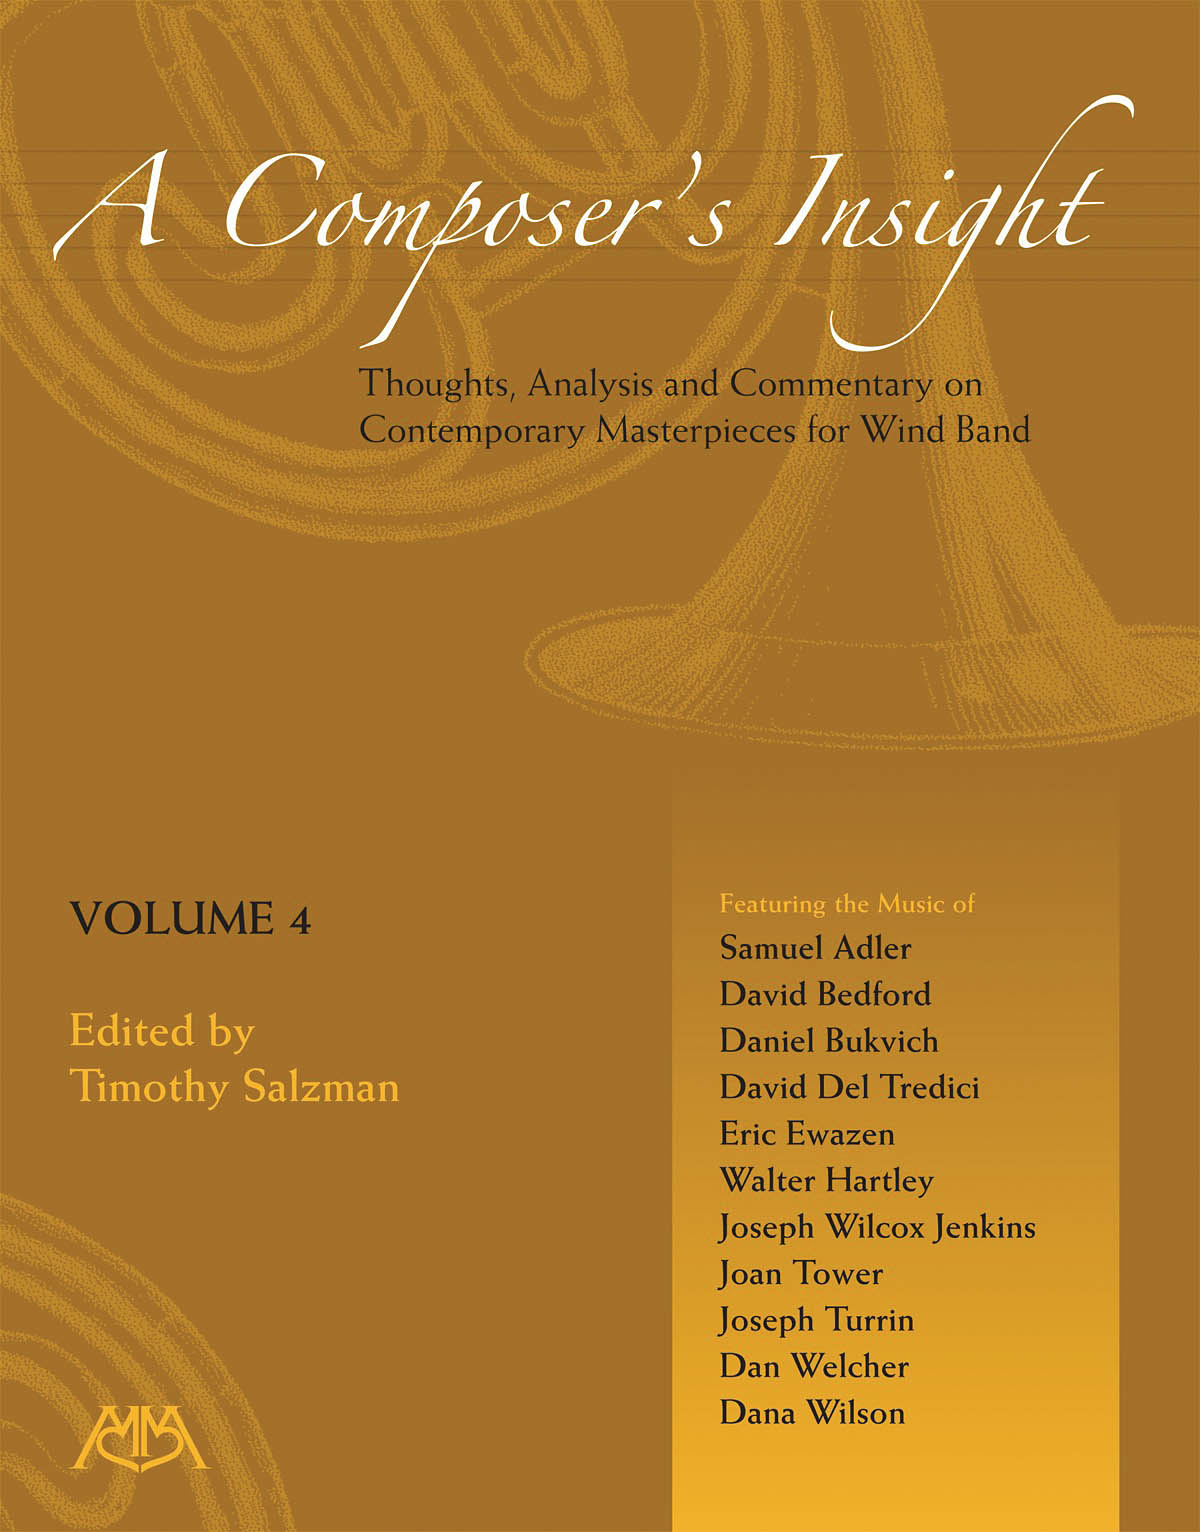 A Composer's Insight - Volume 4 - Thoughts, Analysis and Commentary on Contemporary Masterpieces for Wind Band - knihy o hudbě